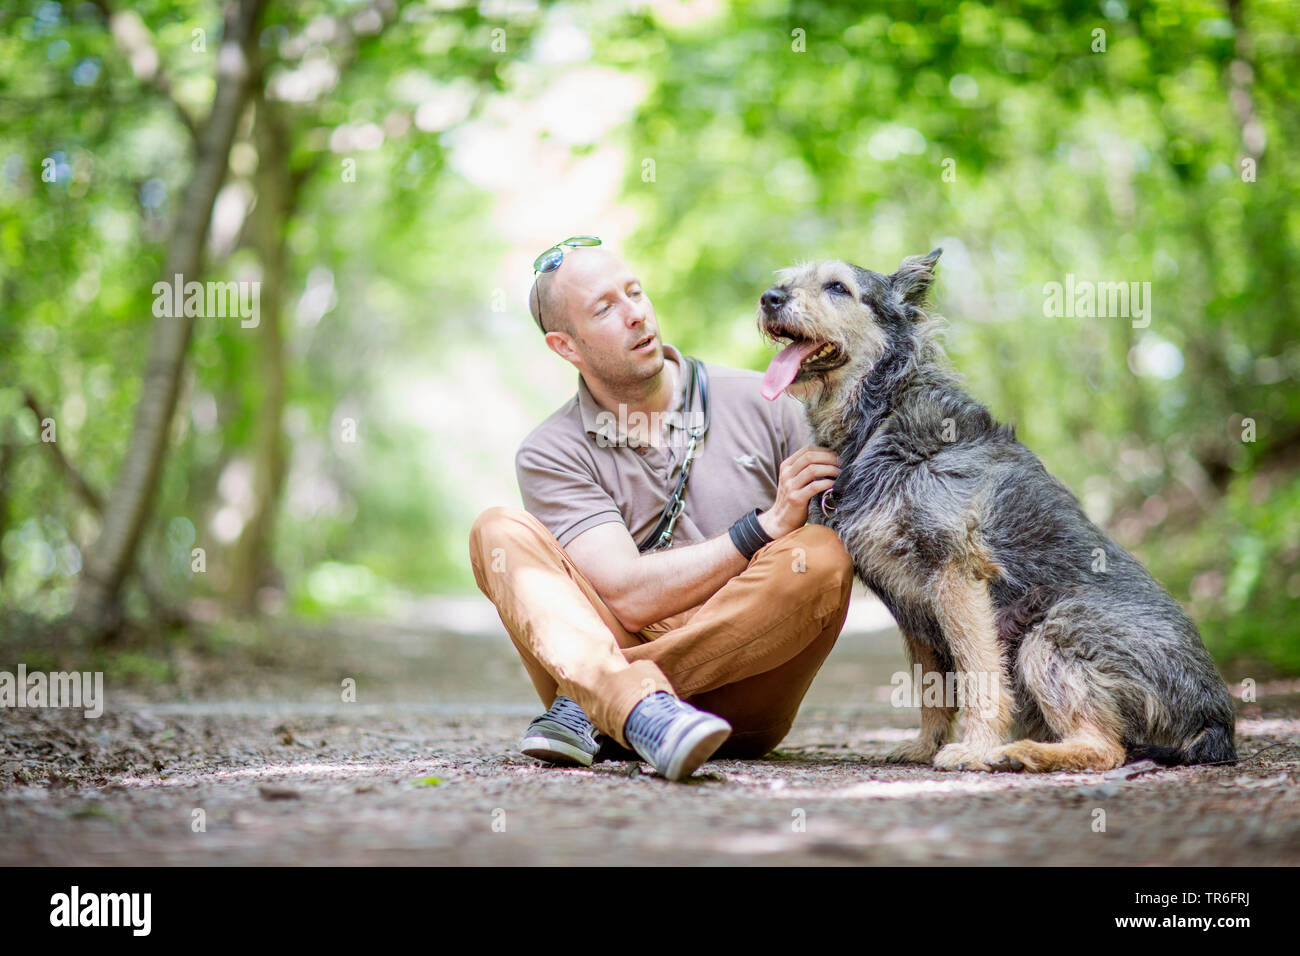 Berger de Picardie, Berger Picard (Canis lupus f. familiaris), man and dog sitting on a forest path, Germany Stock Photo